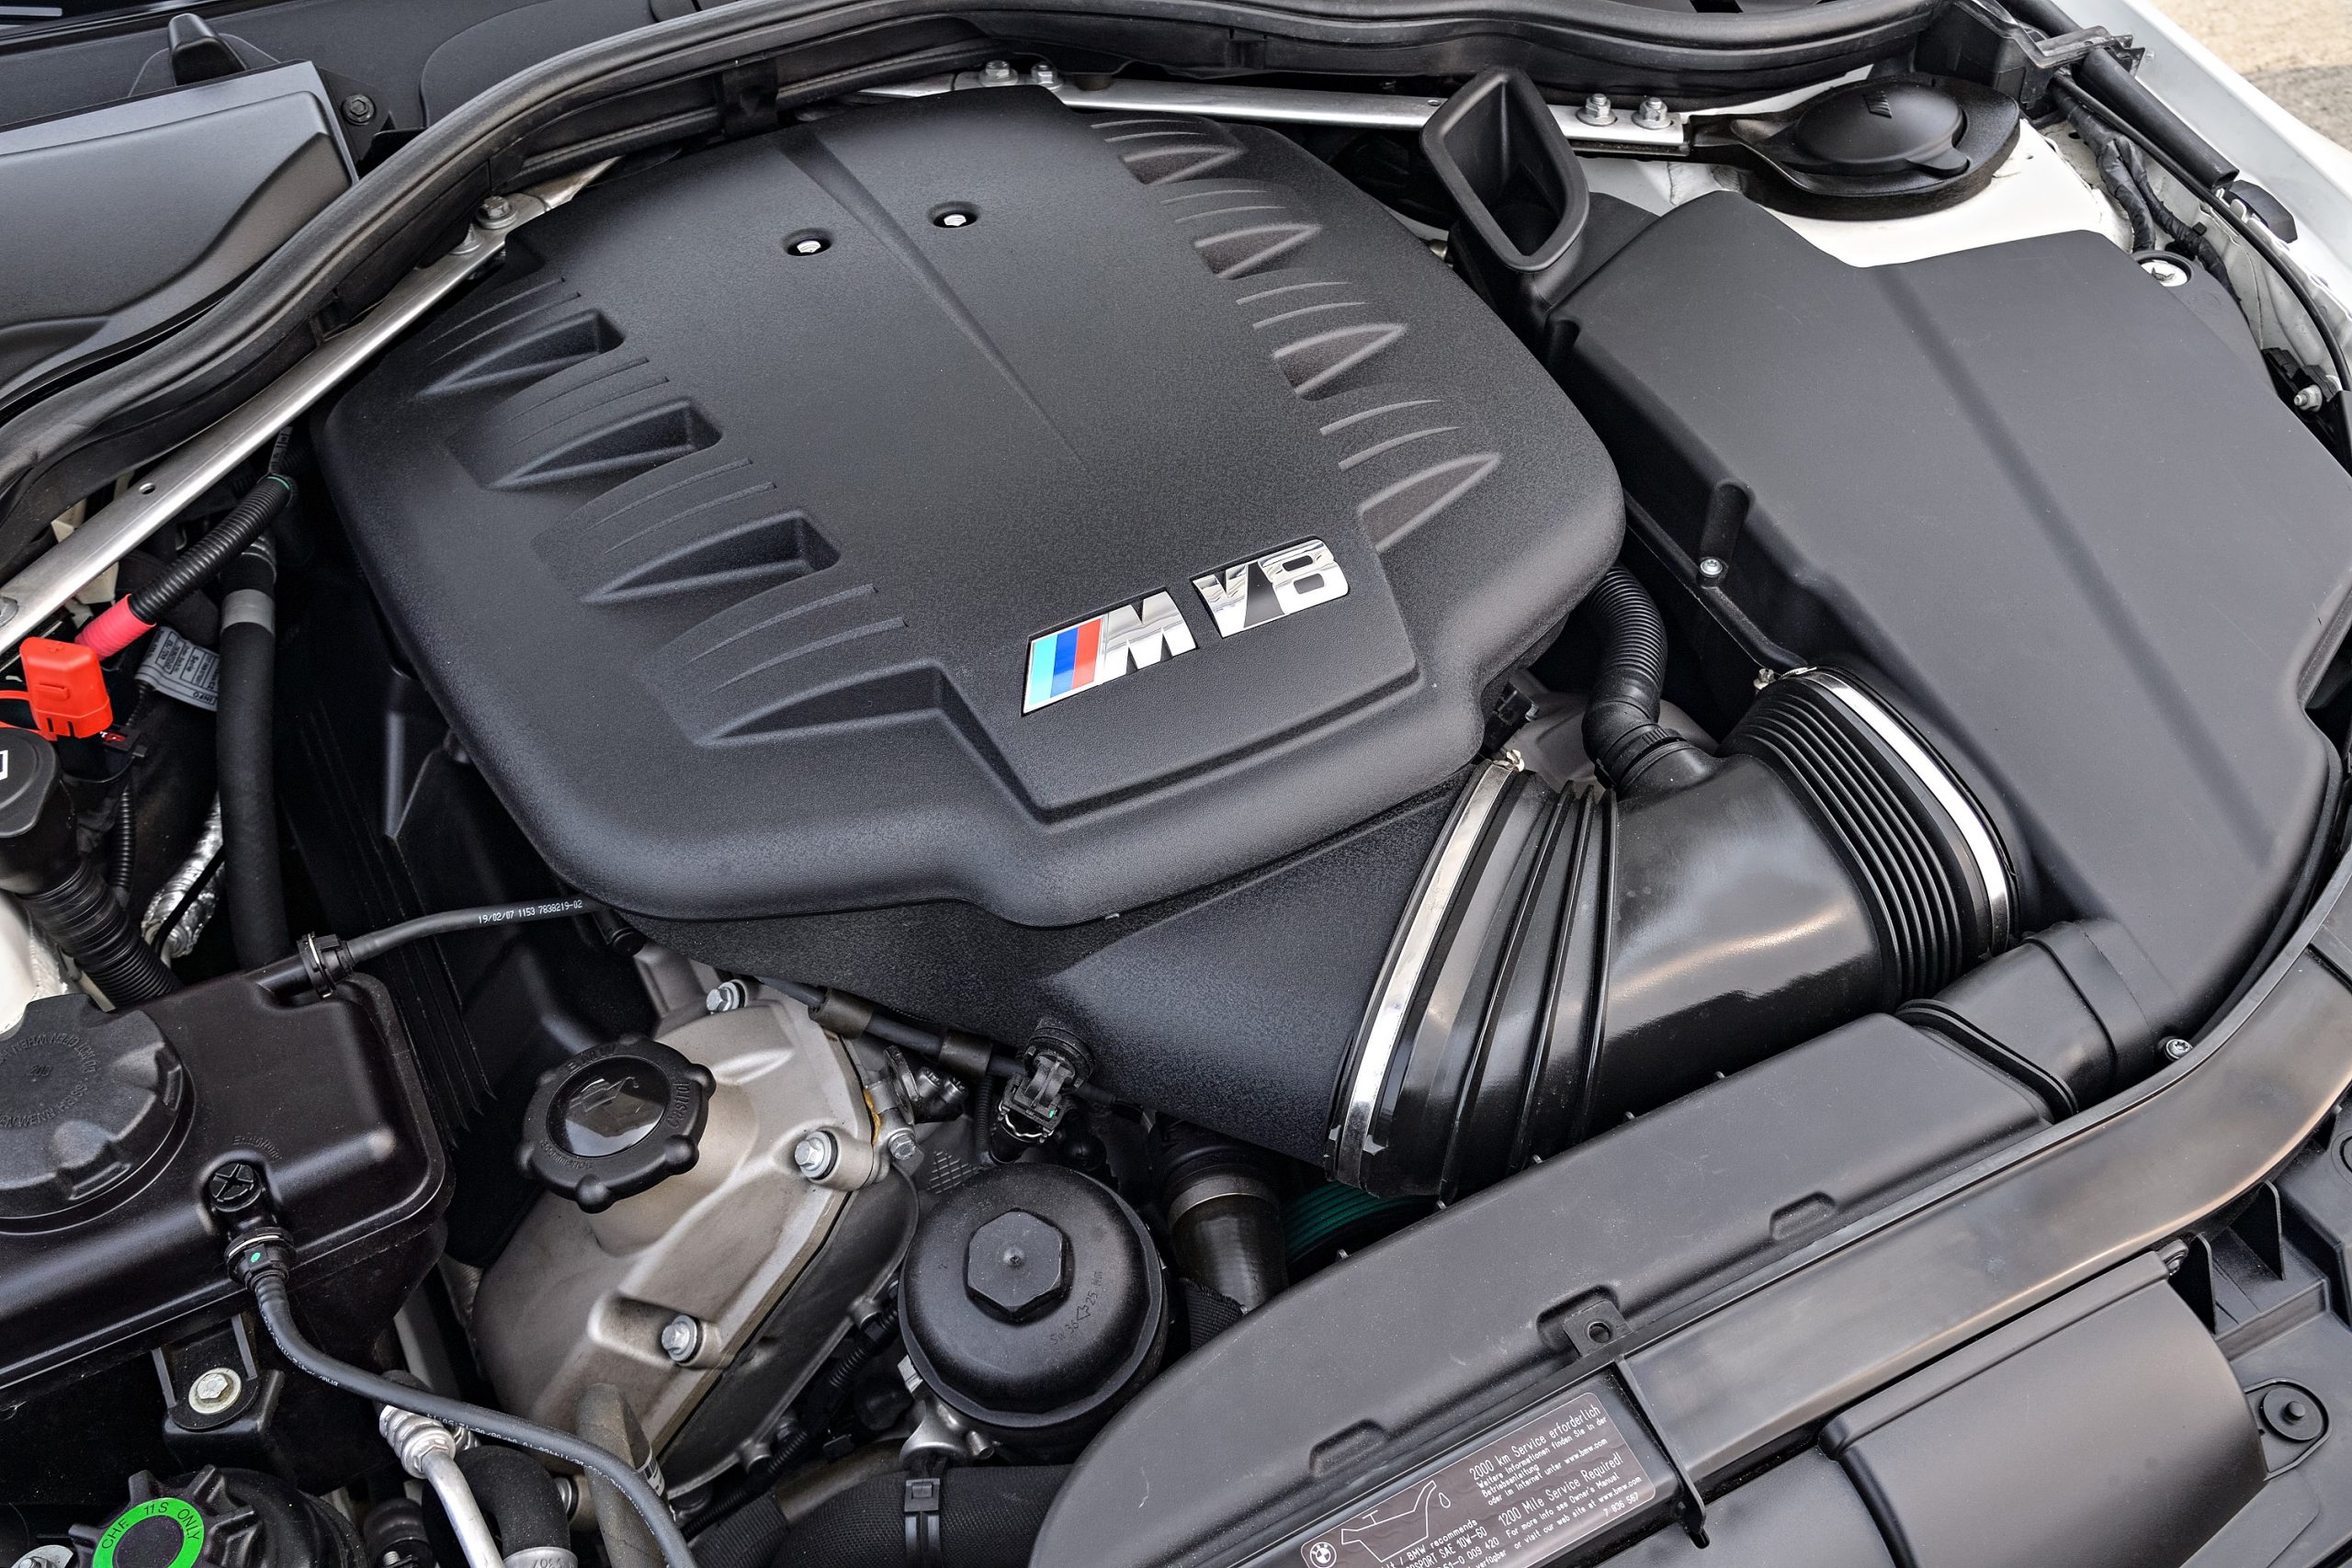 The M3's S65 V8 engine, the last naturally aspirated M car engine